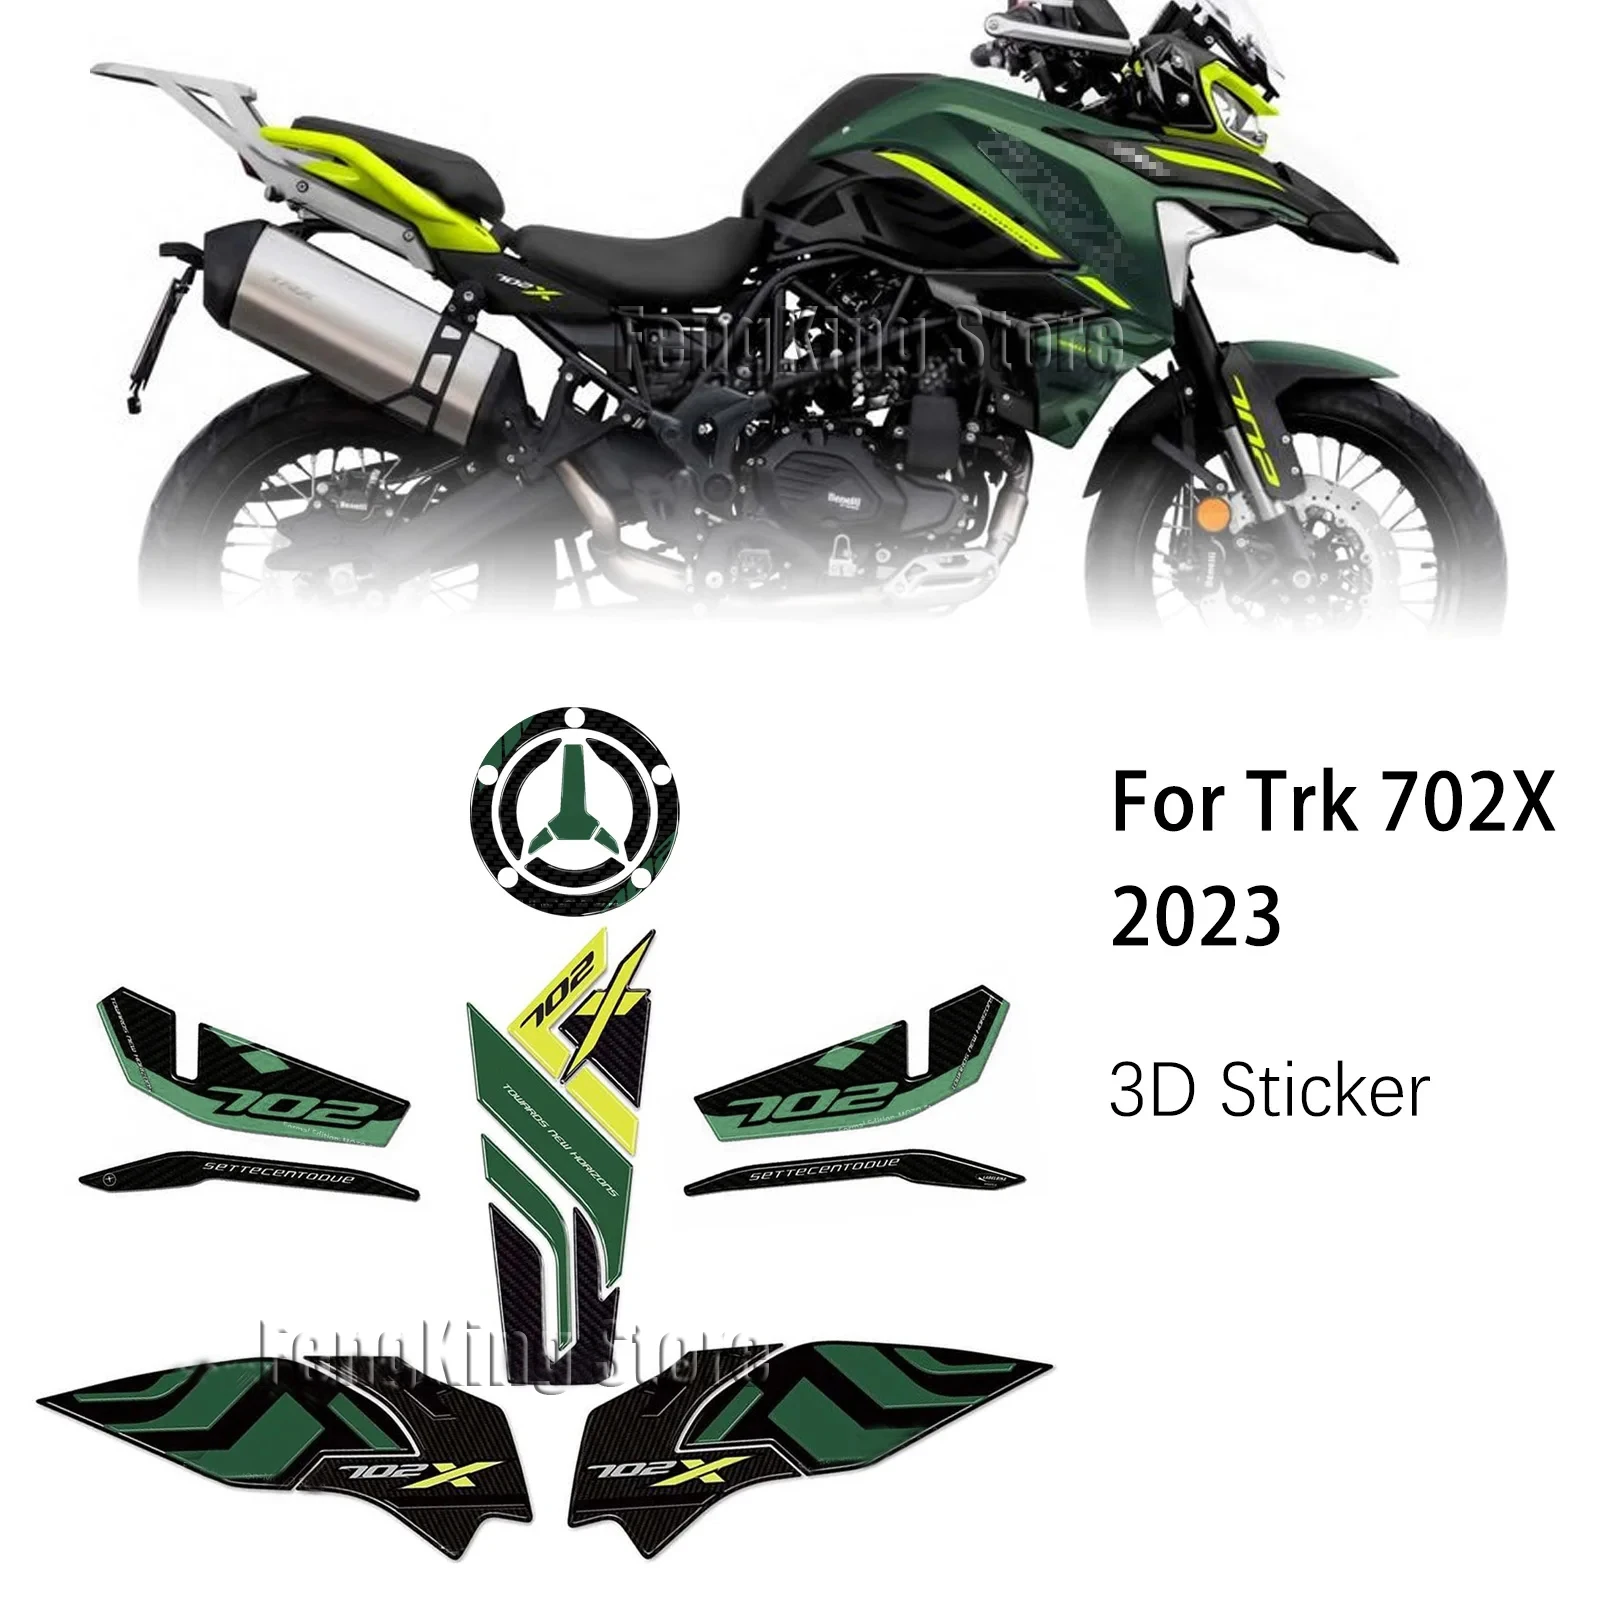 

Motorcycle Trk702x Accessories 3D Gel Epoxy Resin Sticker Tank Pad Protection Kit For Benelli TRK 702X 2023-